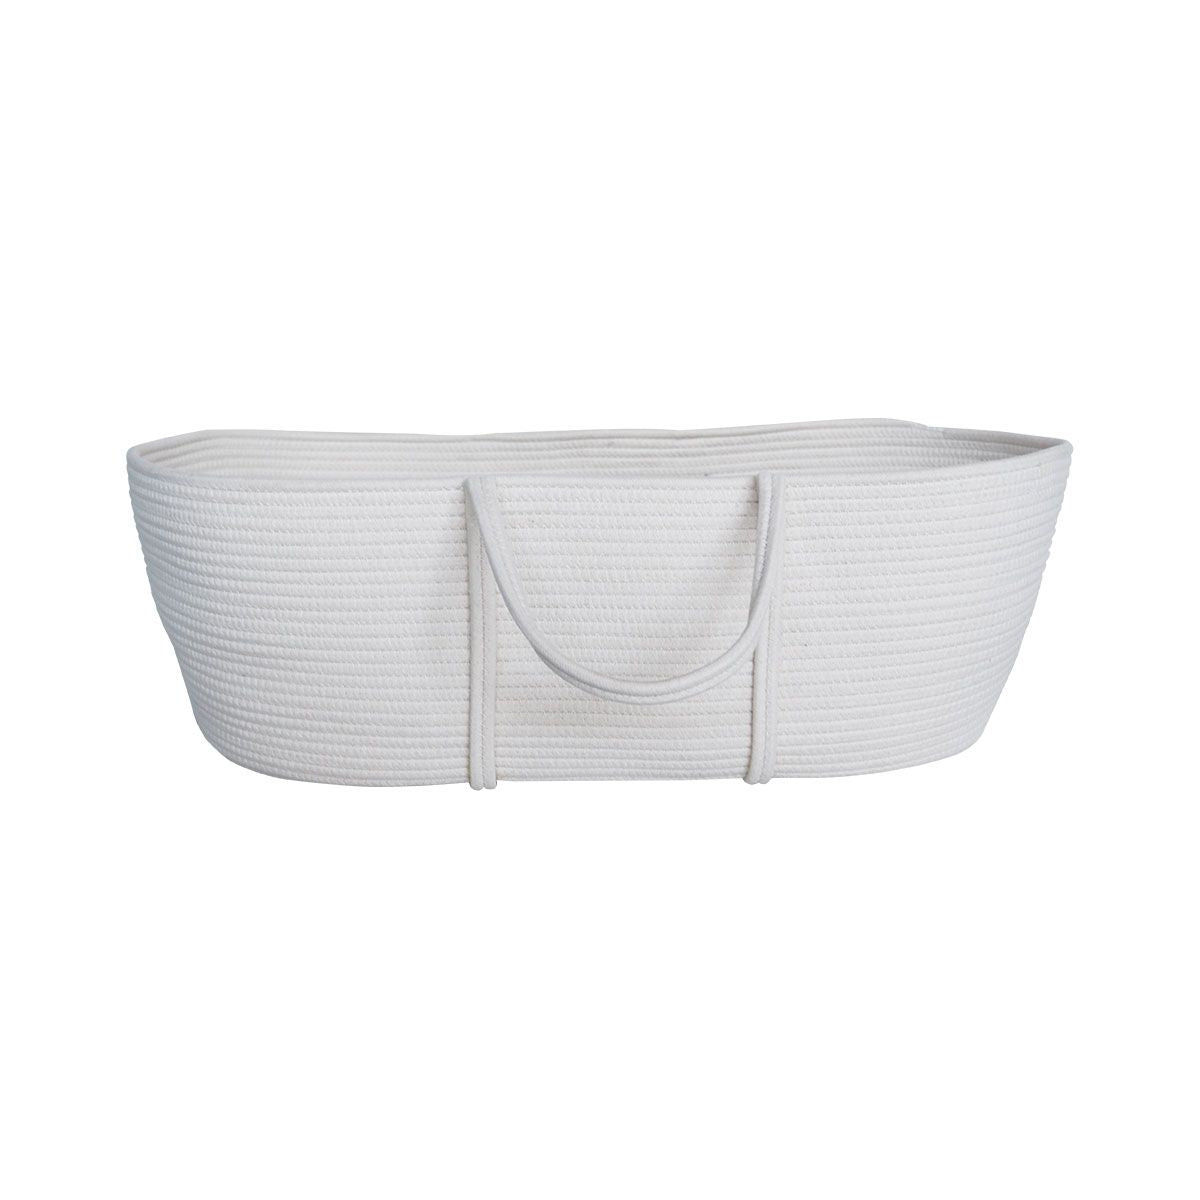 Moses Basket - White Cotton Woven Rope Basket & Stand